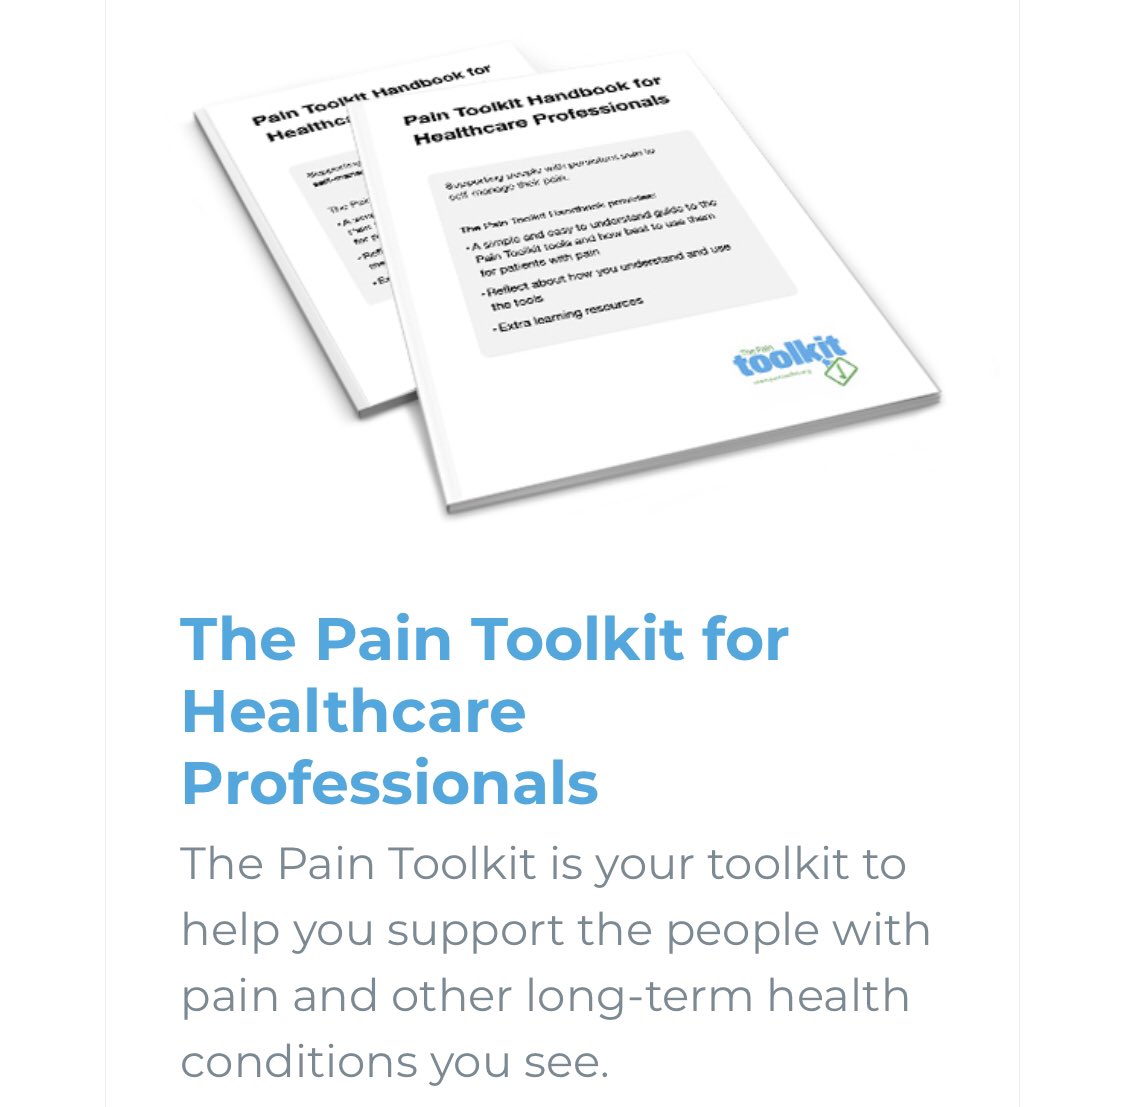 A variety of great resources to choose from on  http://paintoolkit.org   @paintoolkit2